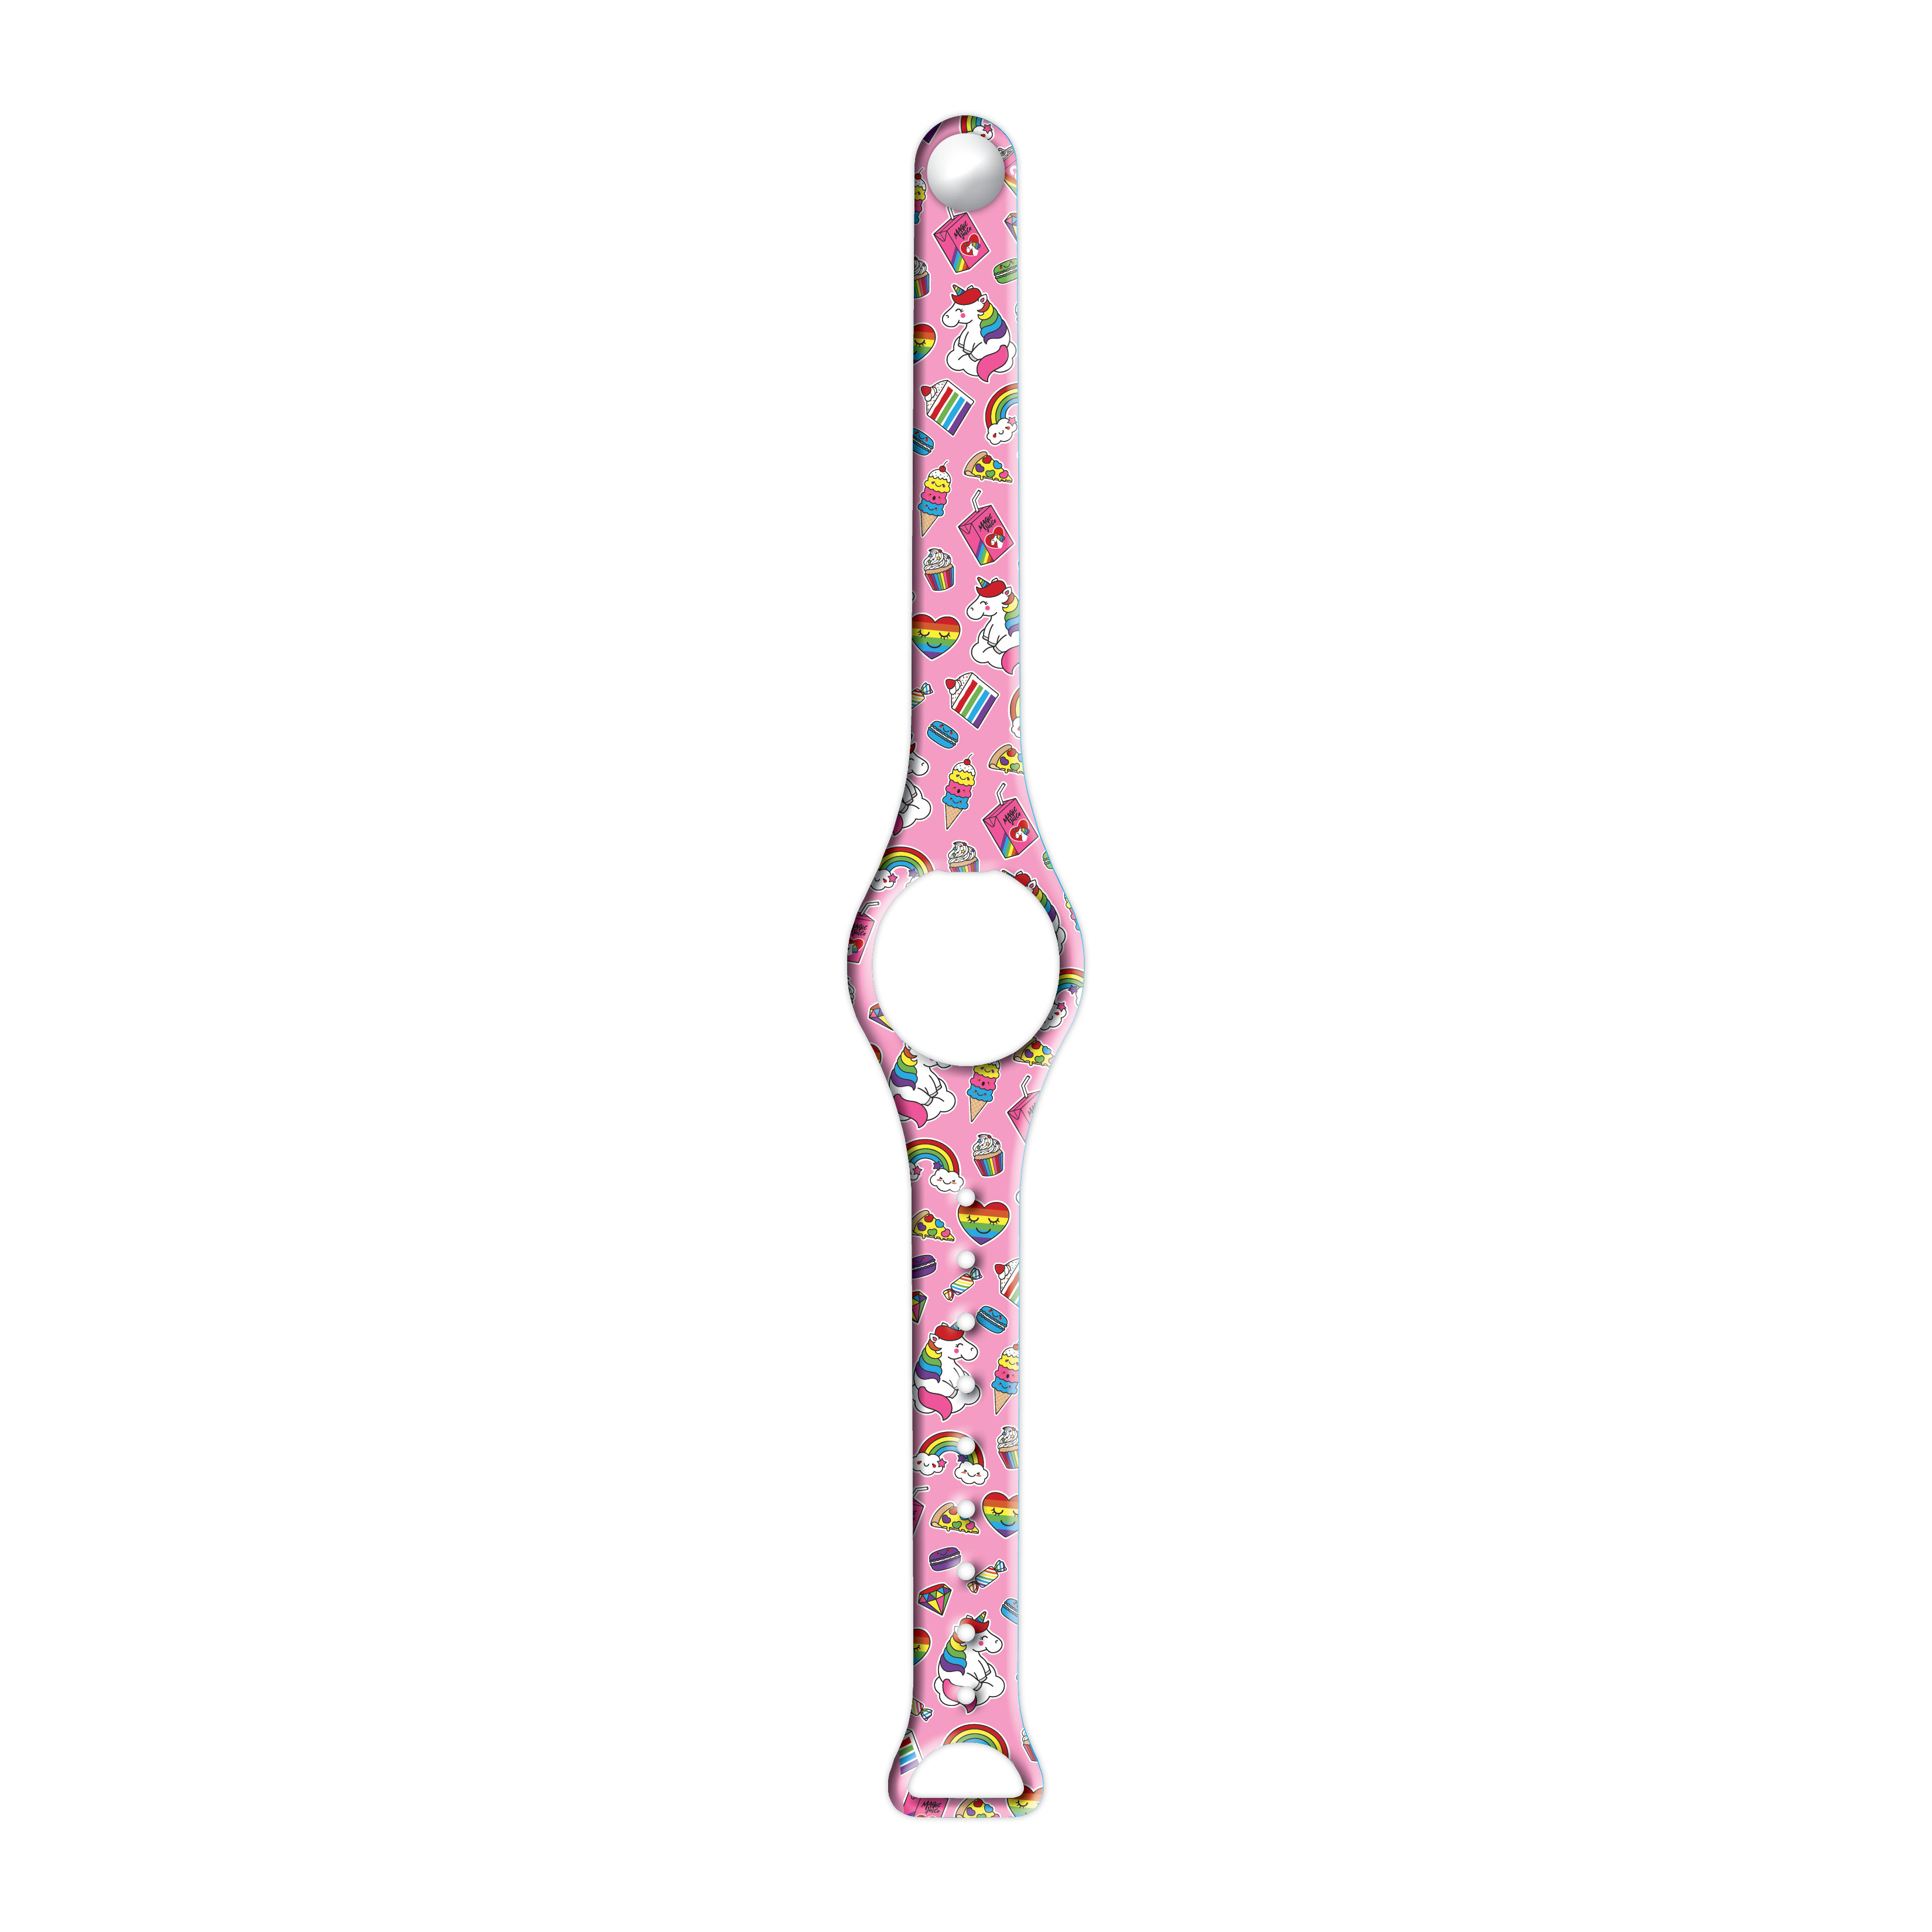 Unicorn Treats - Watchitude Move 2 | Blip Watch Band (Band Only) image number 0